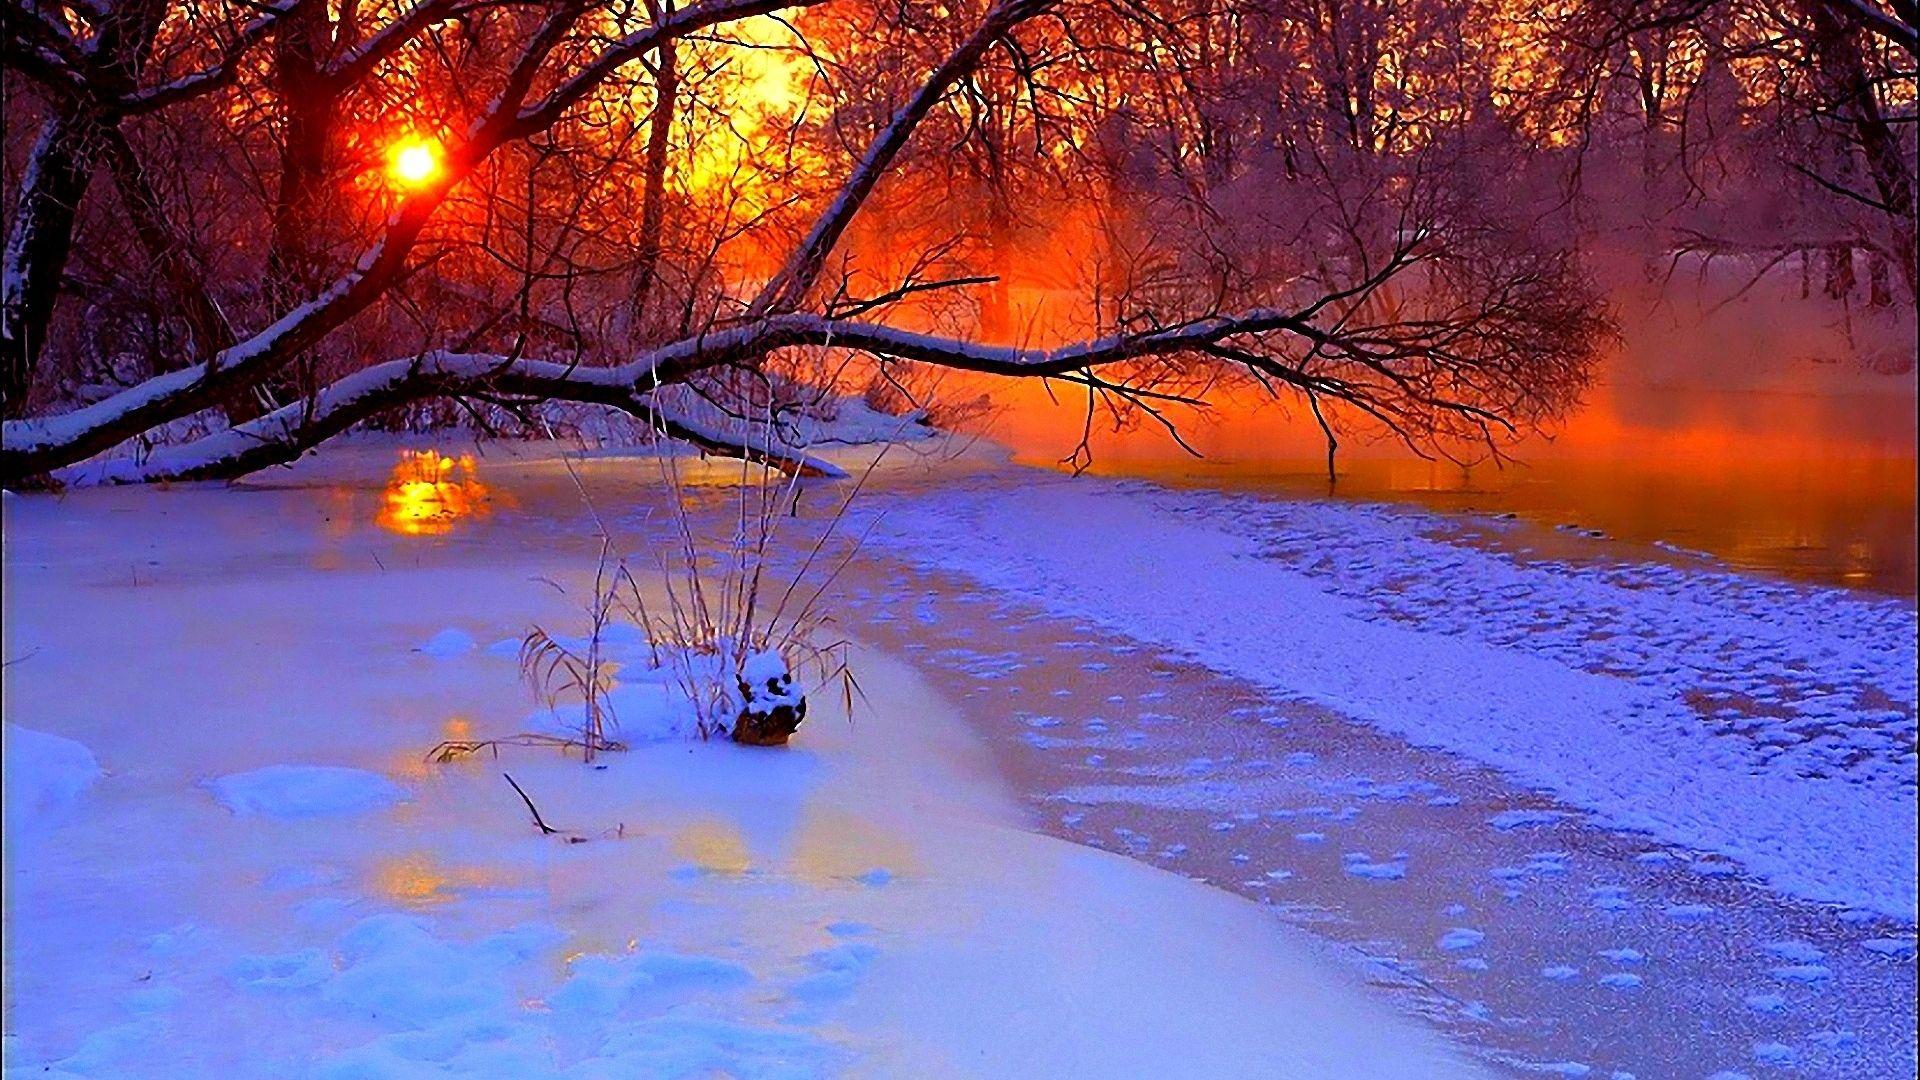 Download wallpaper 1920x1080 winter, sunset, evening, branches, tree